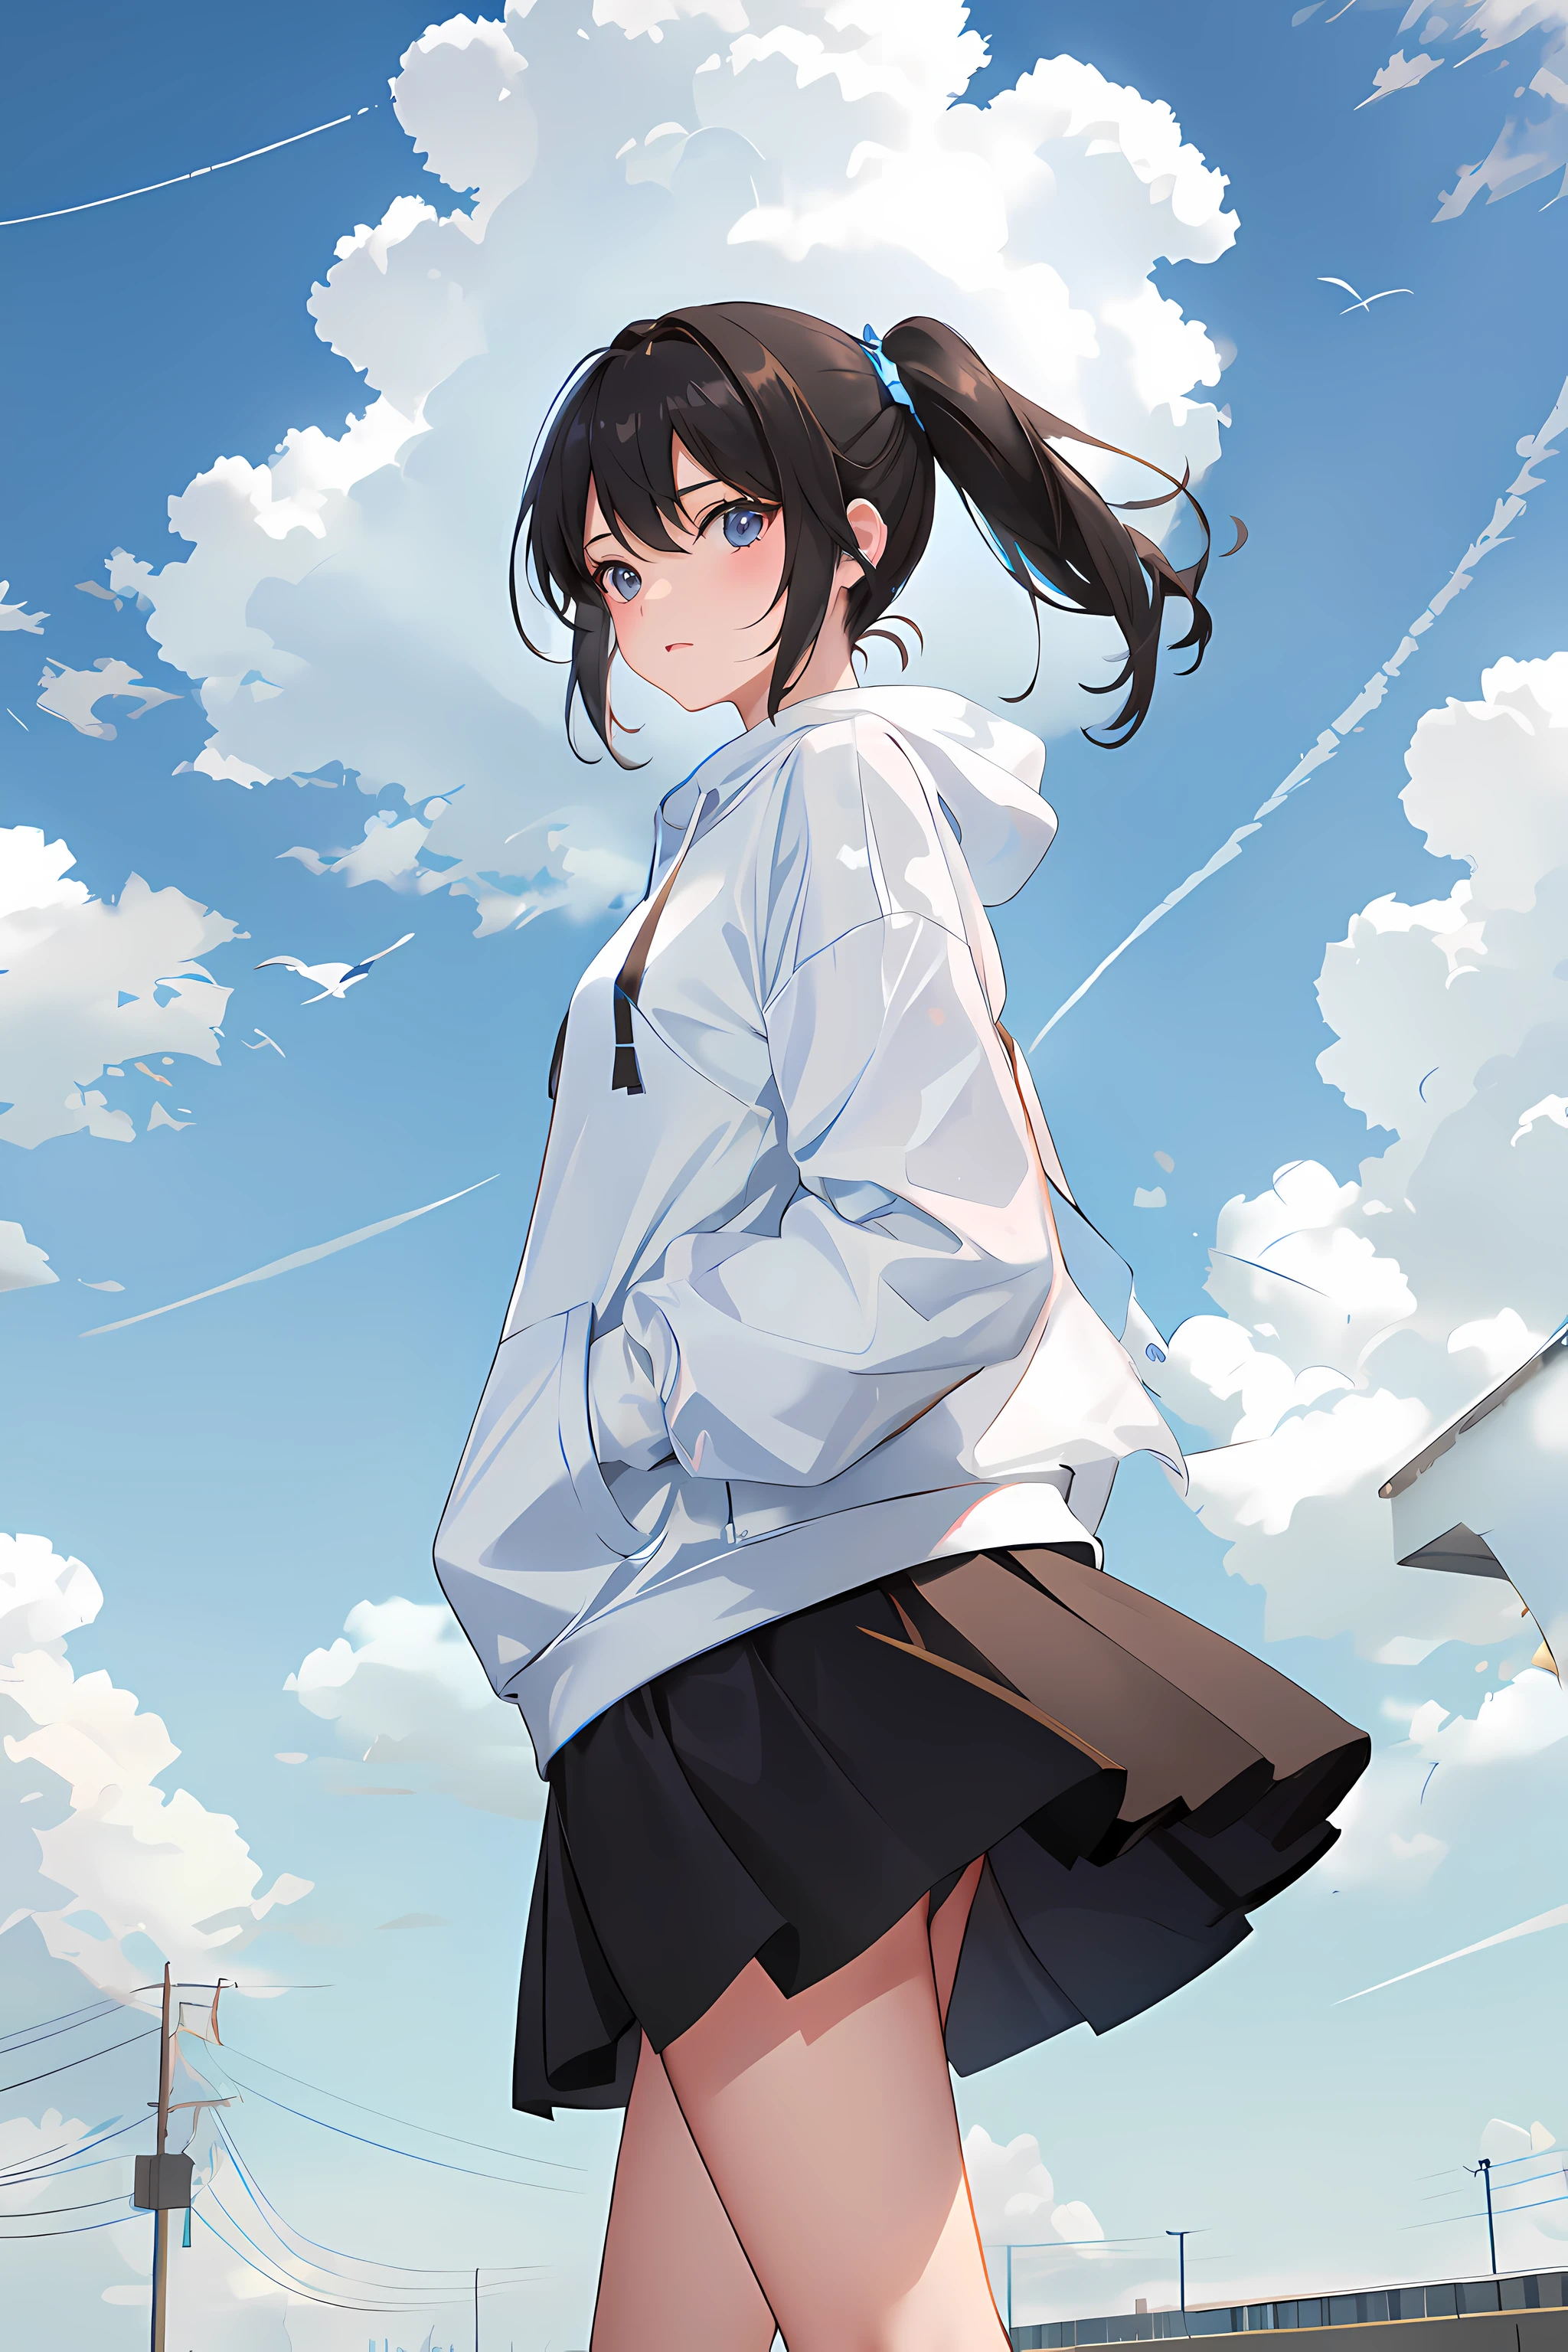 "Photo shoot with 1 girl in a white hoodie and short black skirt walking with a strong gust of wind making her hair Fly View of the blue sky and modern housing"